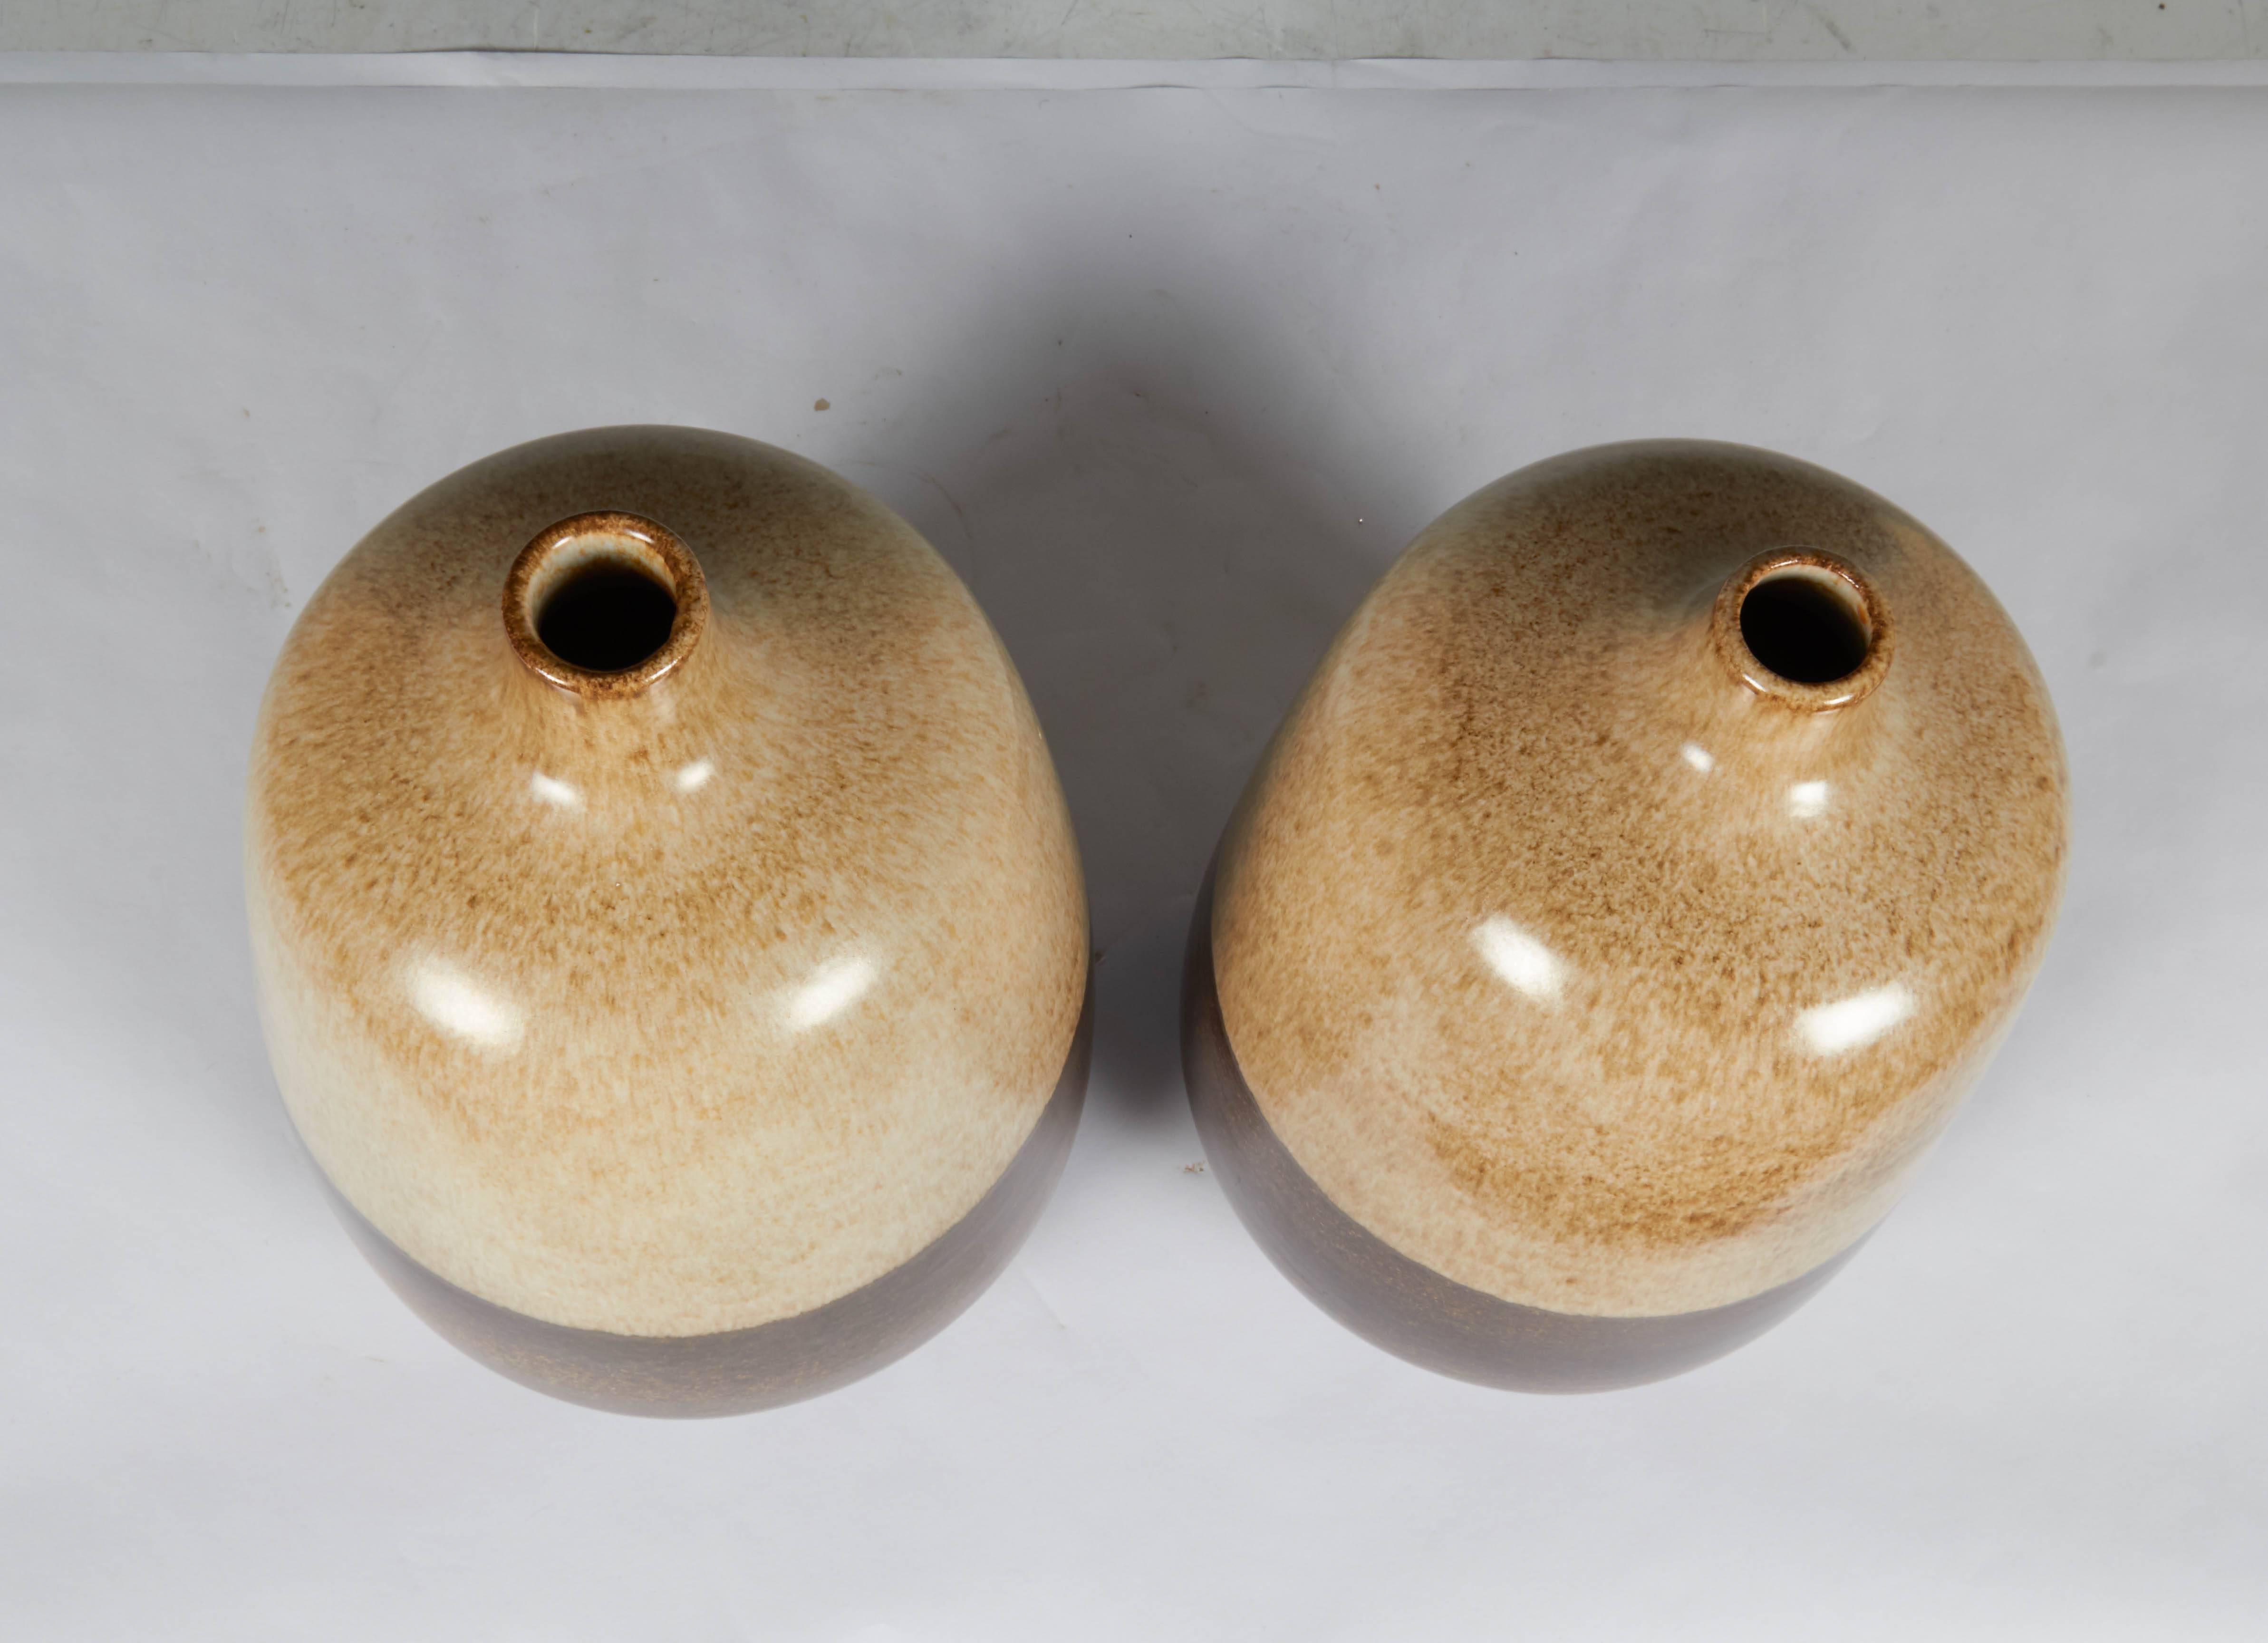 A pair of unmatched bottle form ceramic vases by Italian designer Alvino Bagni for Raymor produced, circa 1960s, each with mottled two-tone glazes, in beige and brown. Marks include original Raymor label, with codes [4437 BAH/4437 BAG]. Very good